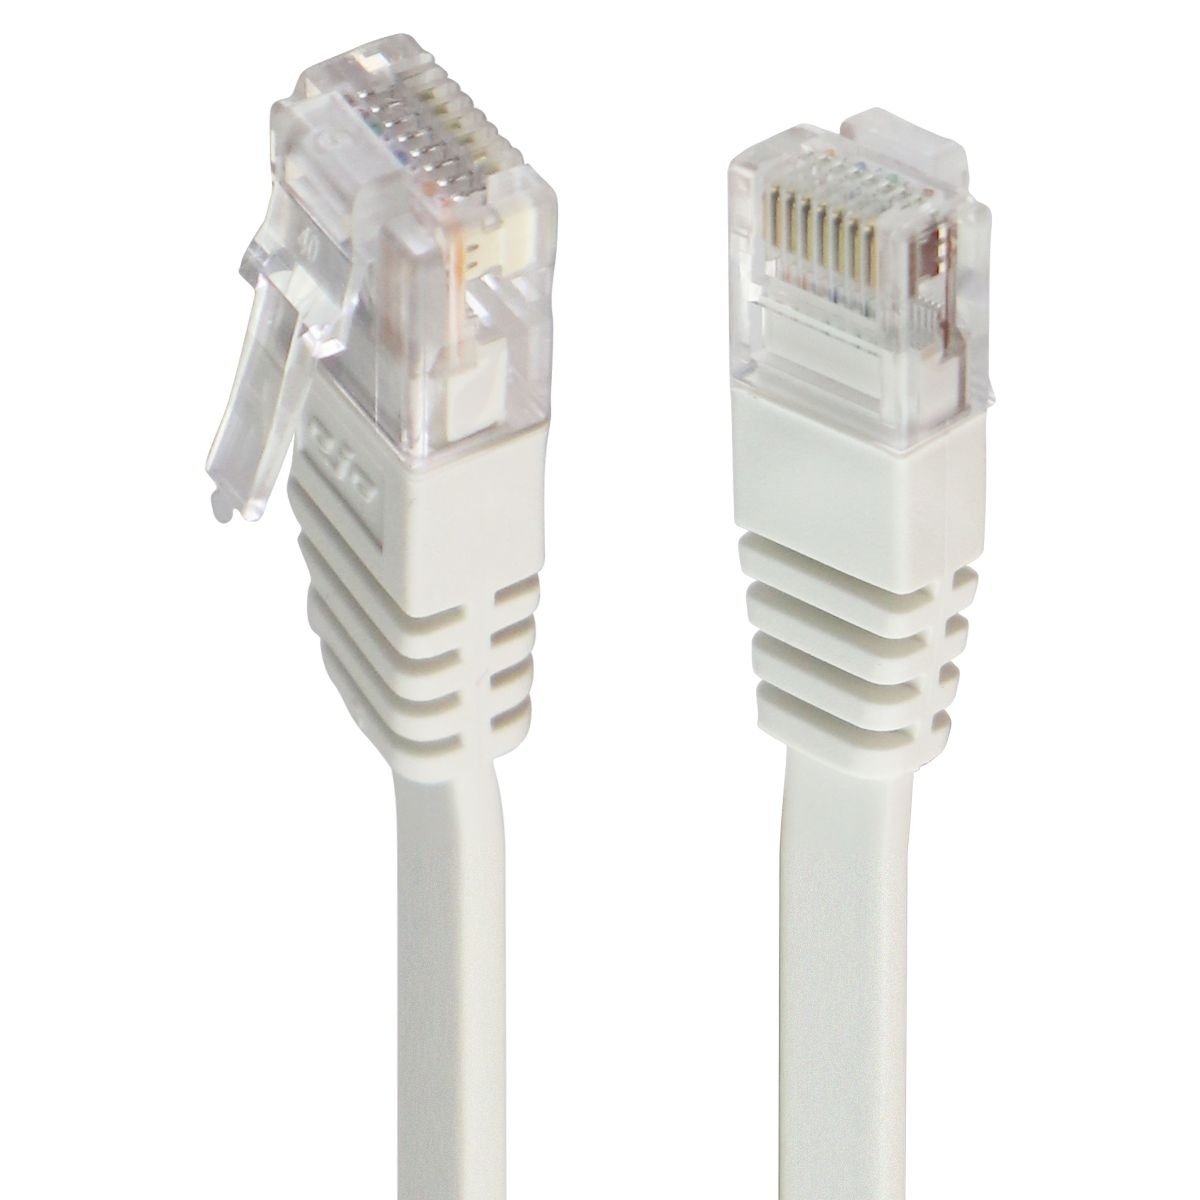 Verizon (5-Foot) Flat Tangle-Free Ethernet CAT 5E Patch Cable - White